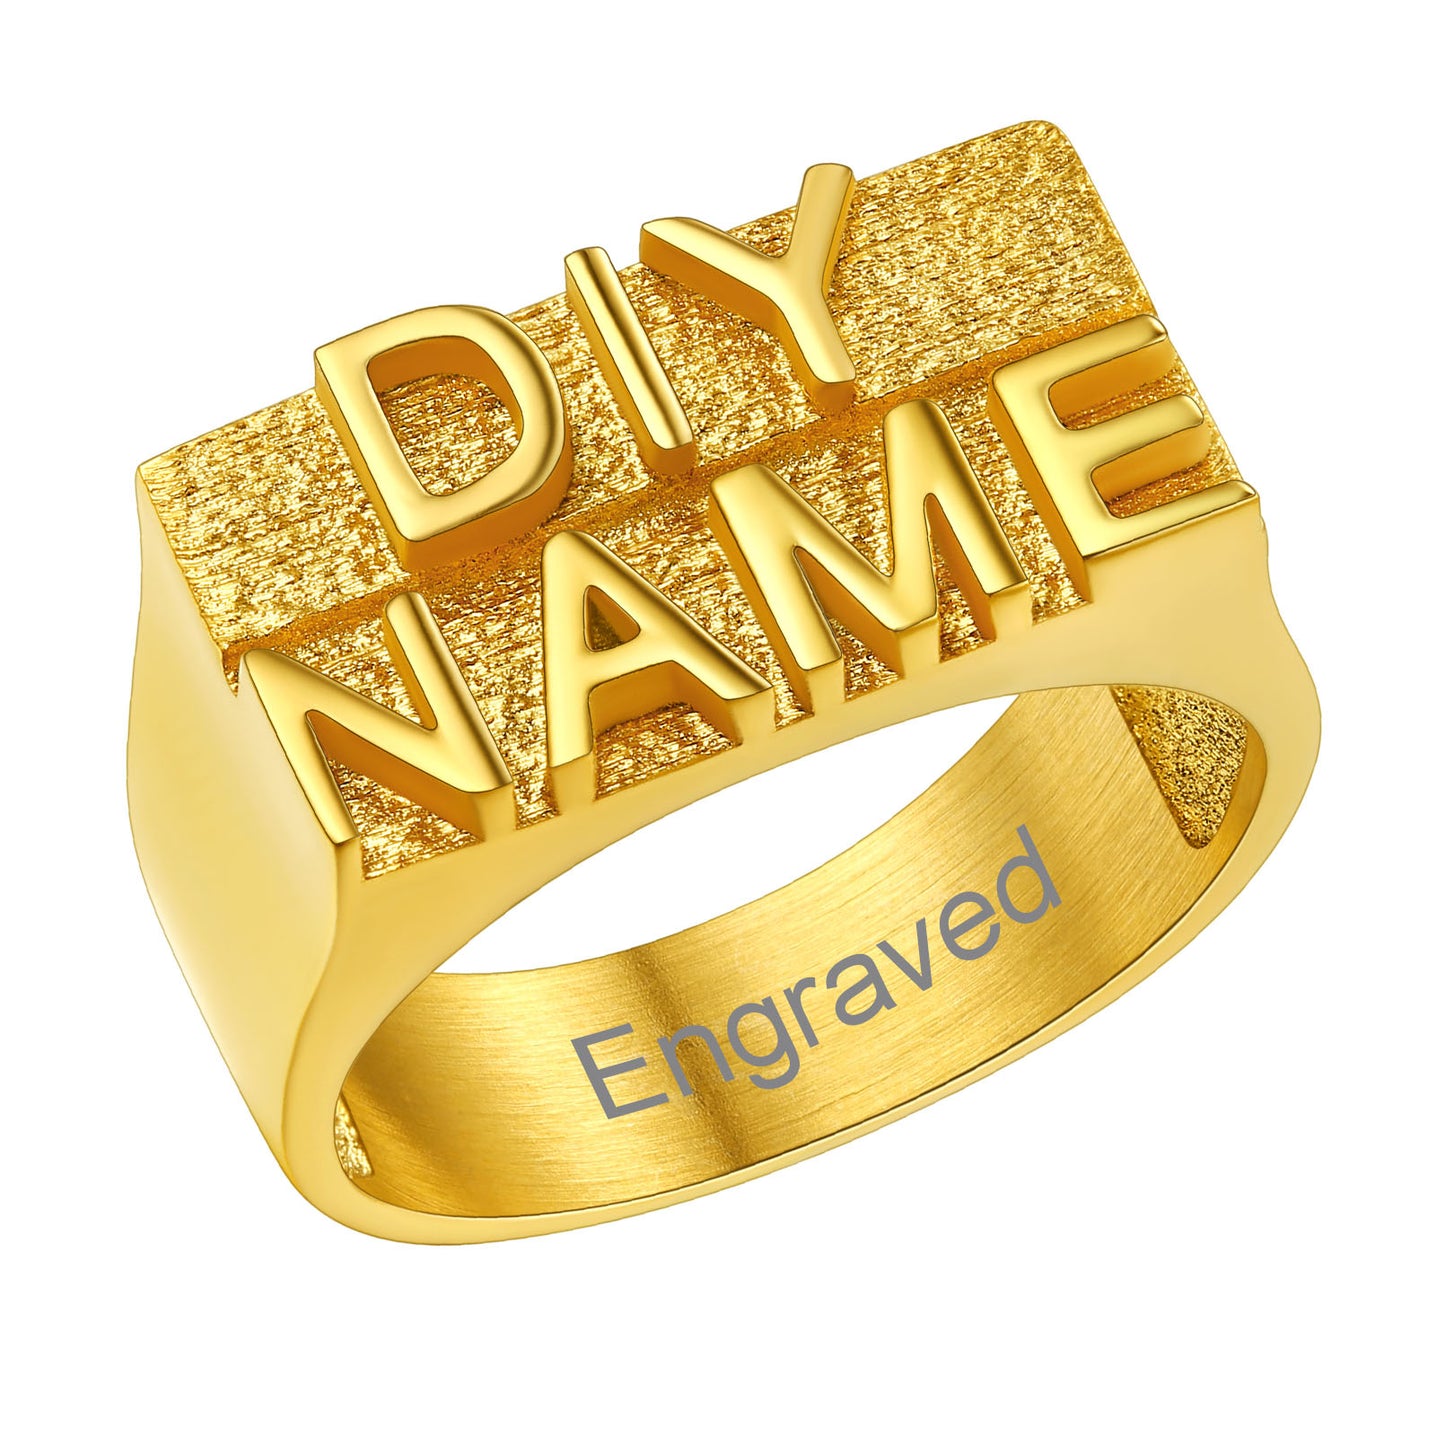 Custom4U Gold Plated/ 9.8mm wide Personalized Name Engraved Rings 